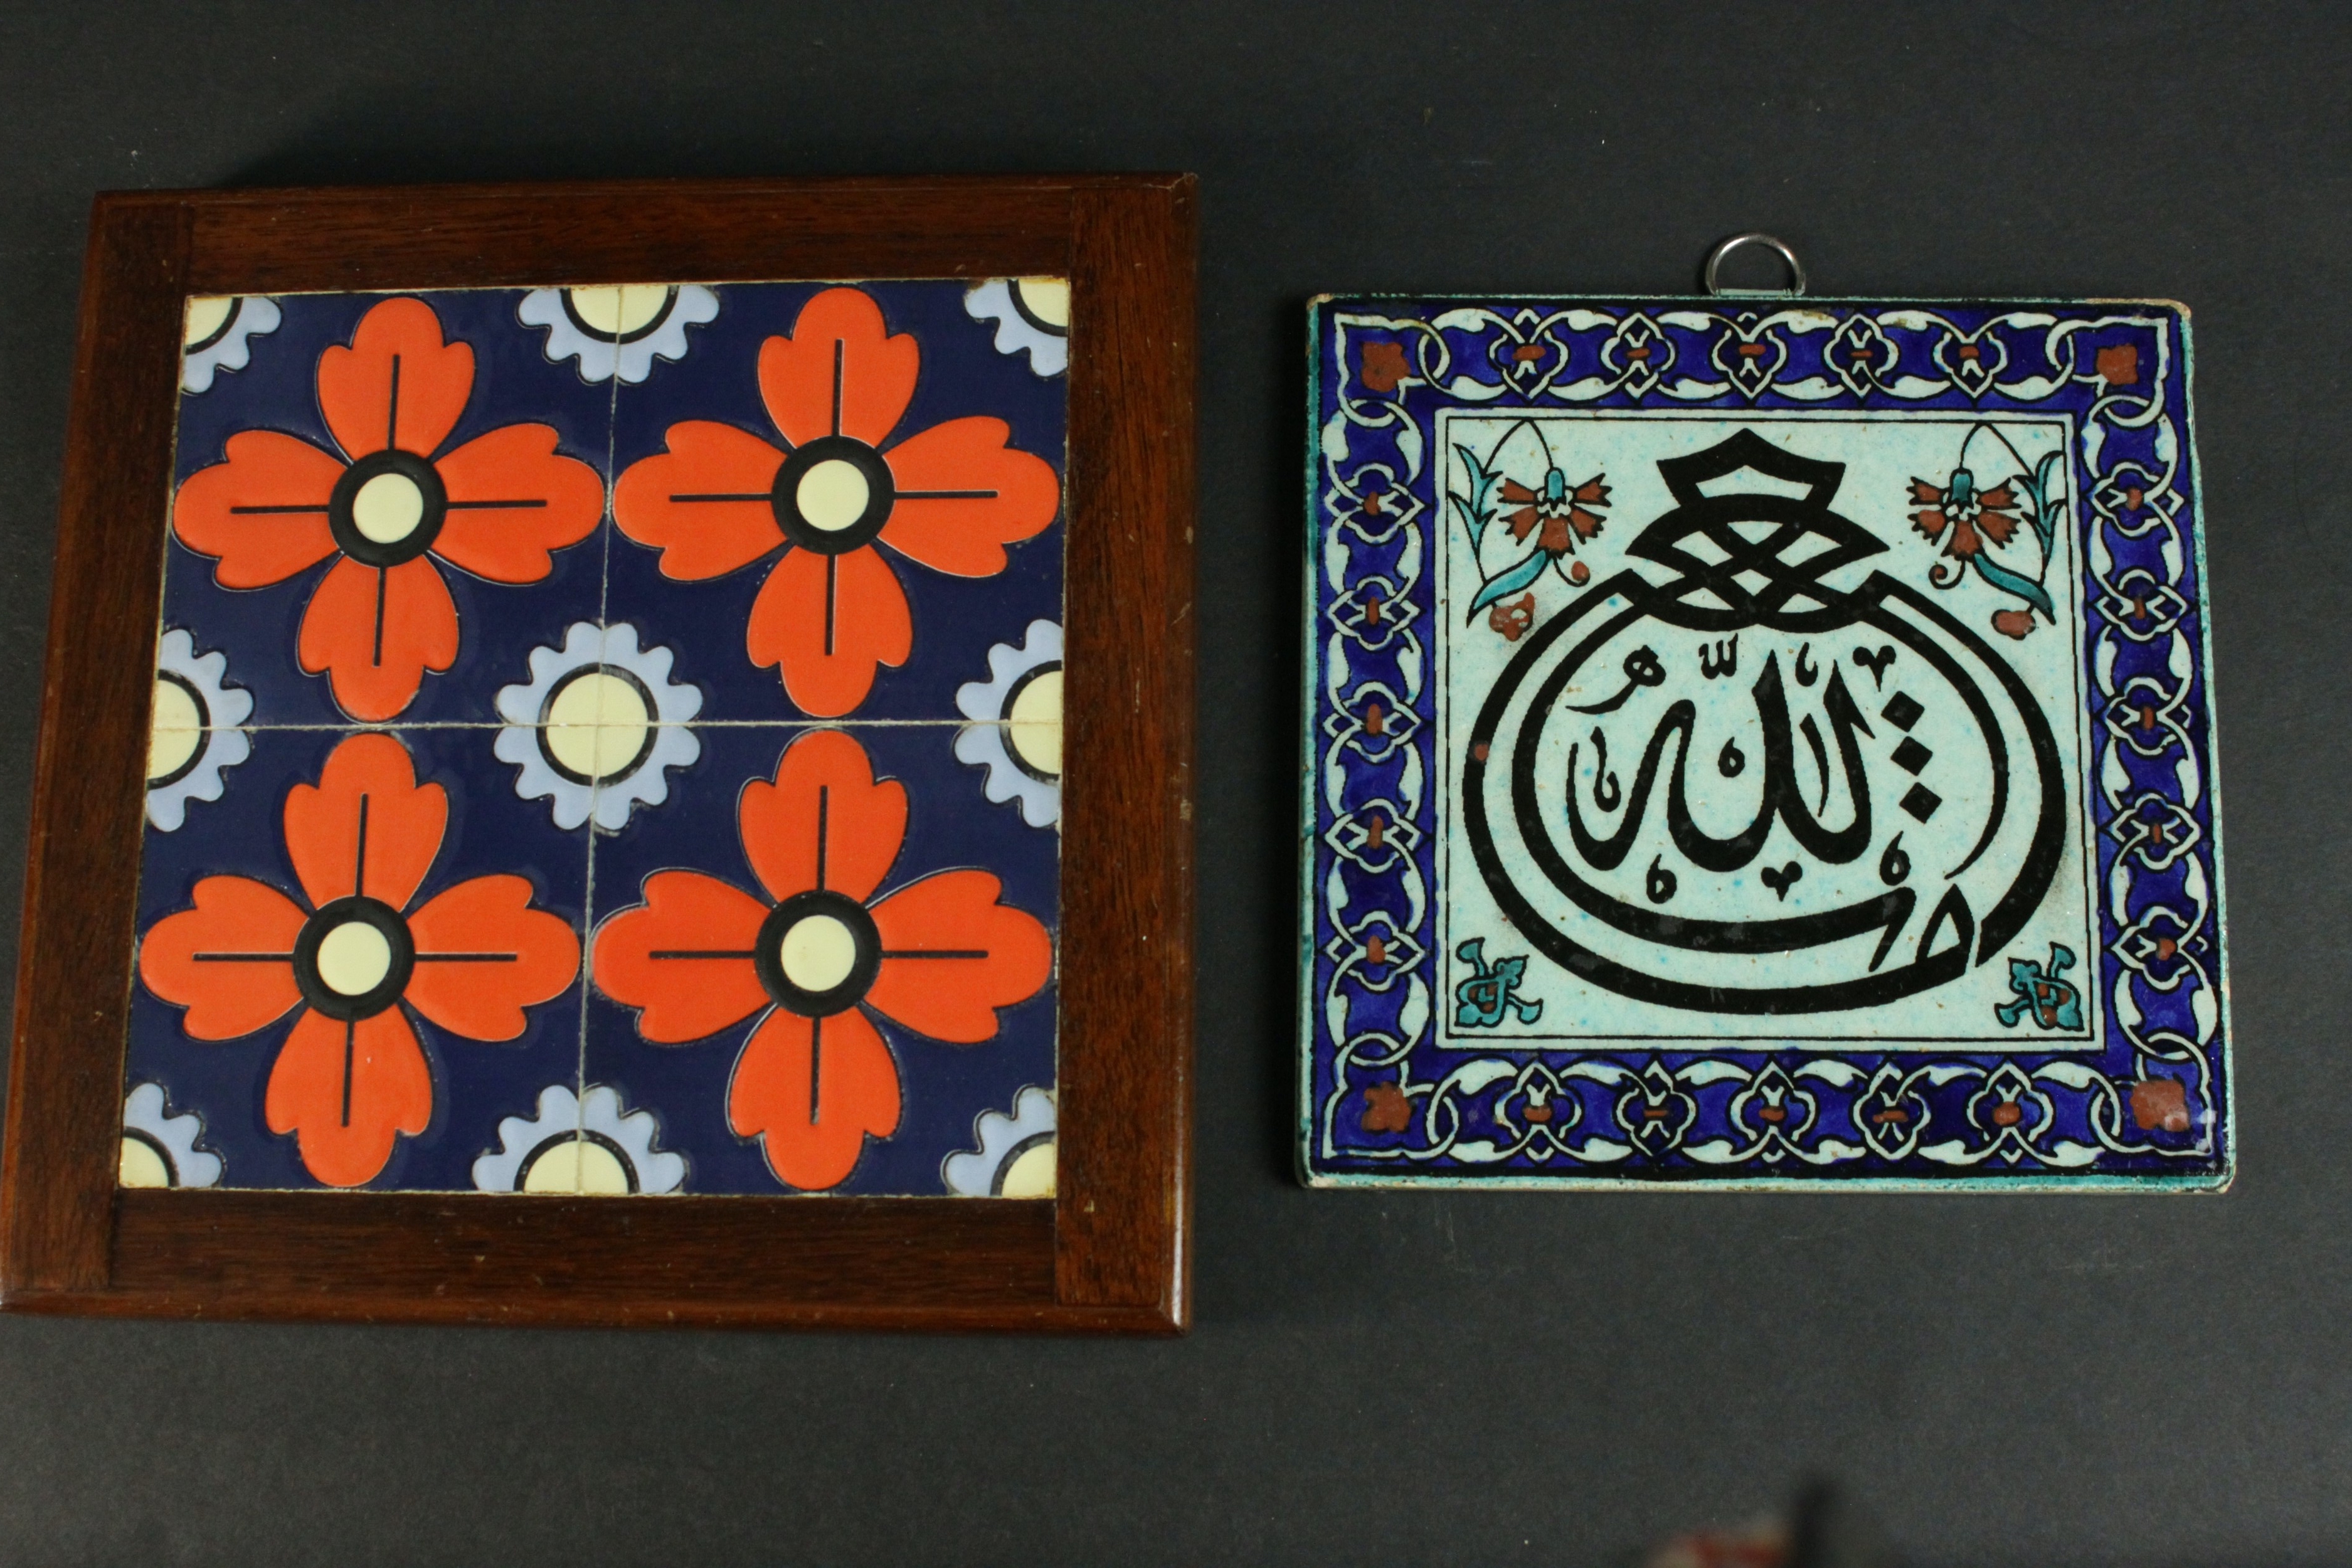 A framed Greek floral design ceramic tile by Arthur Zaaro along with an Indo-Persian calligraphic